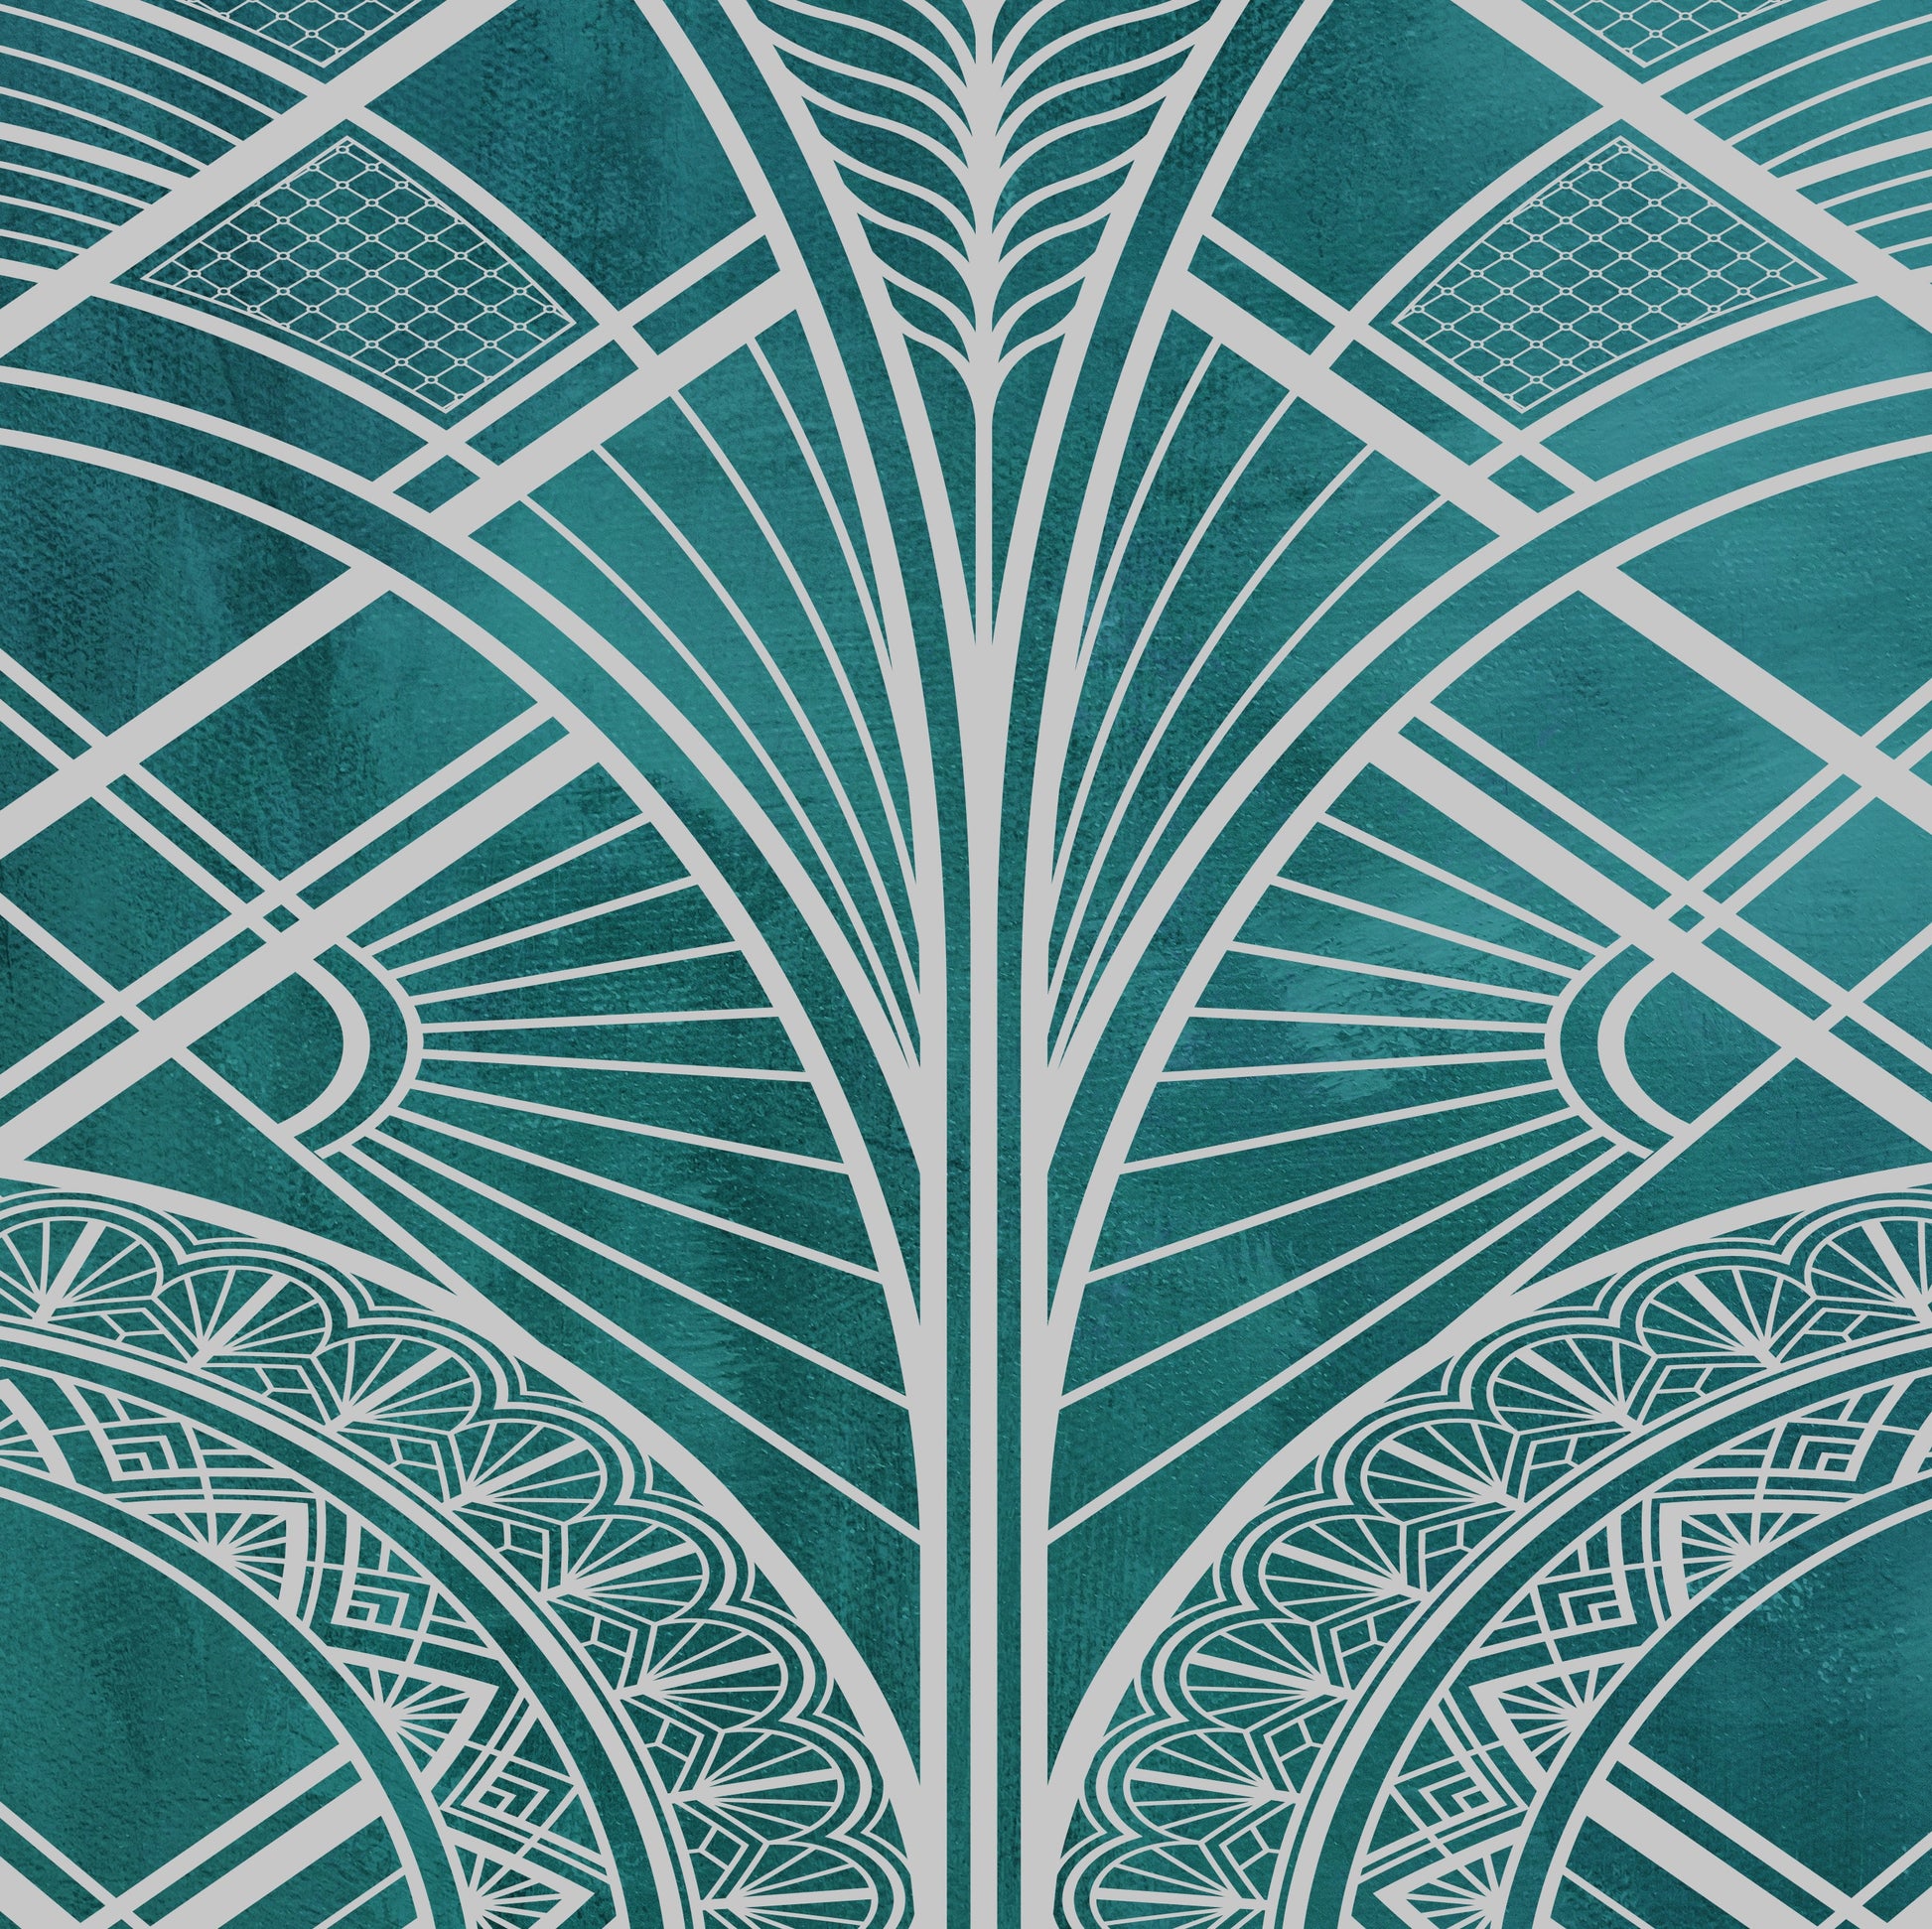 Close up detail of teal and silver art deco print